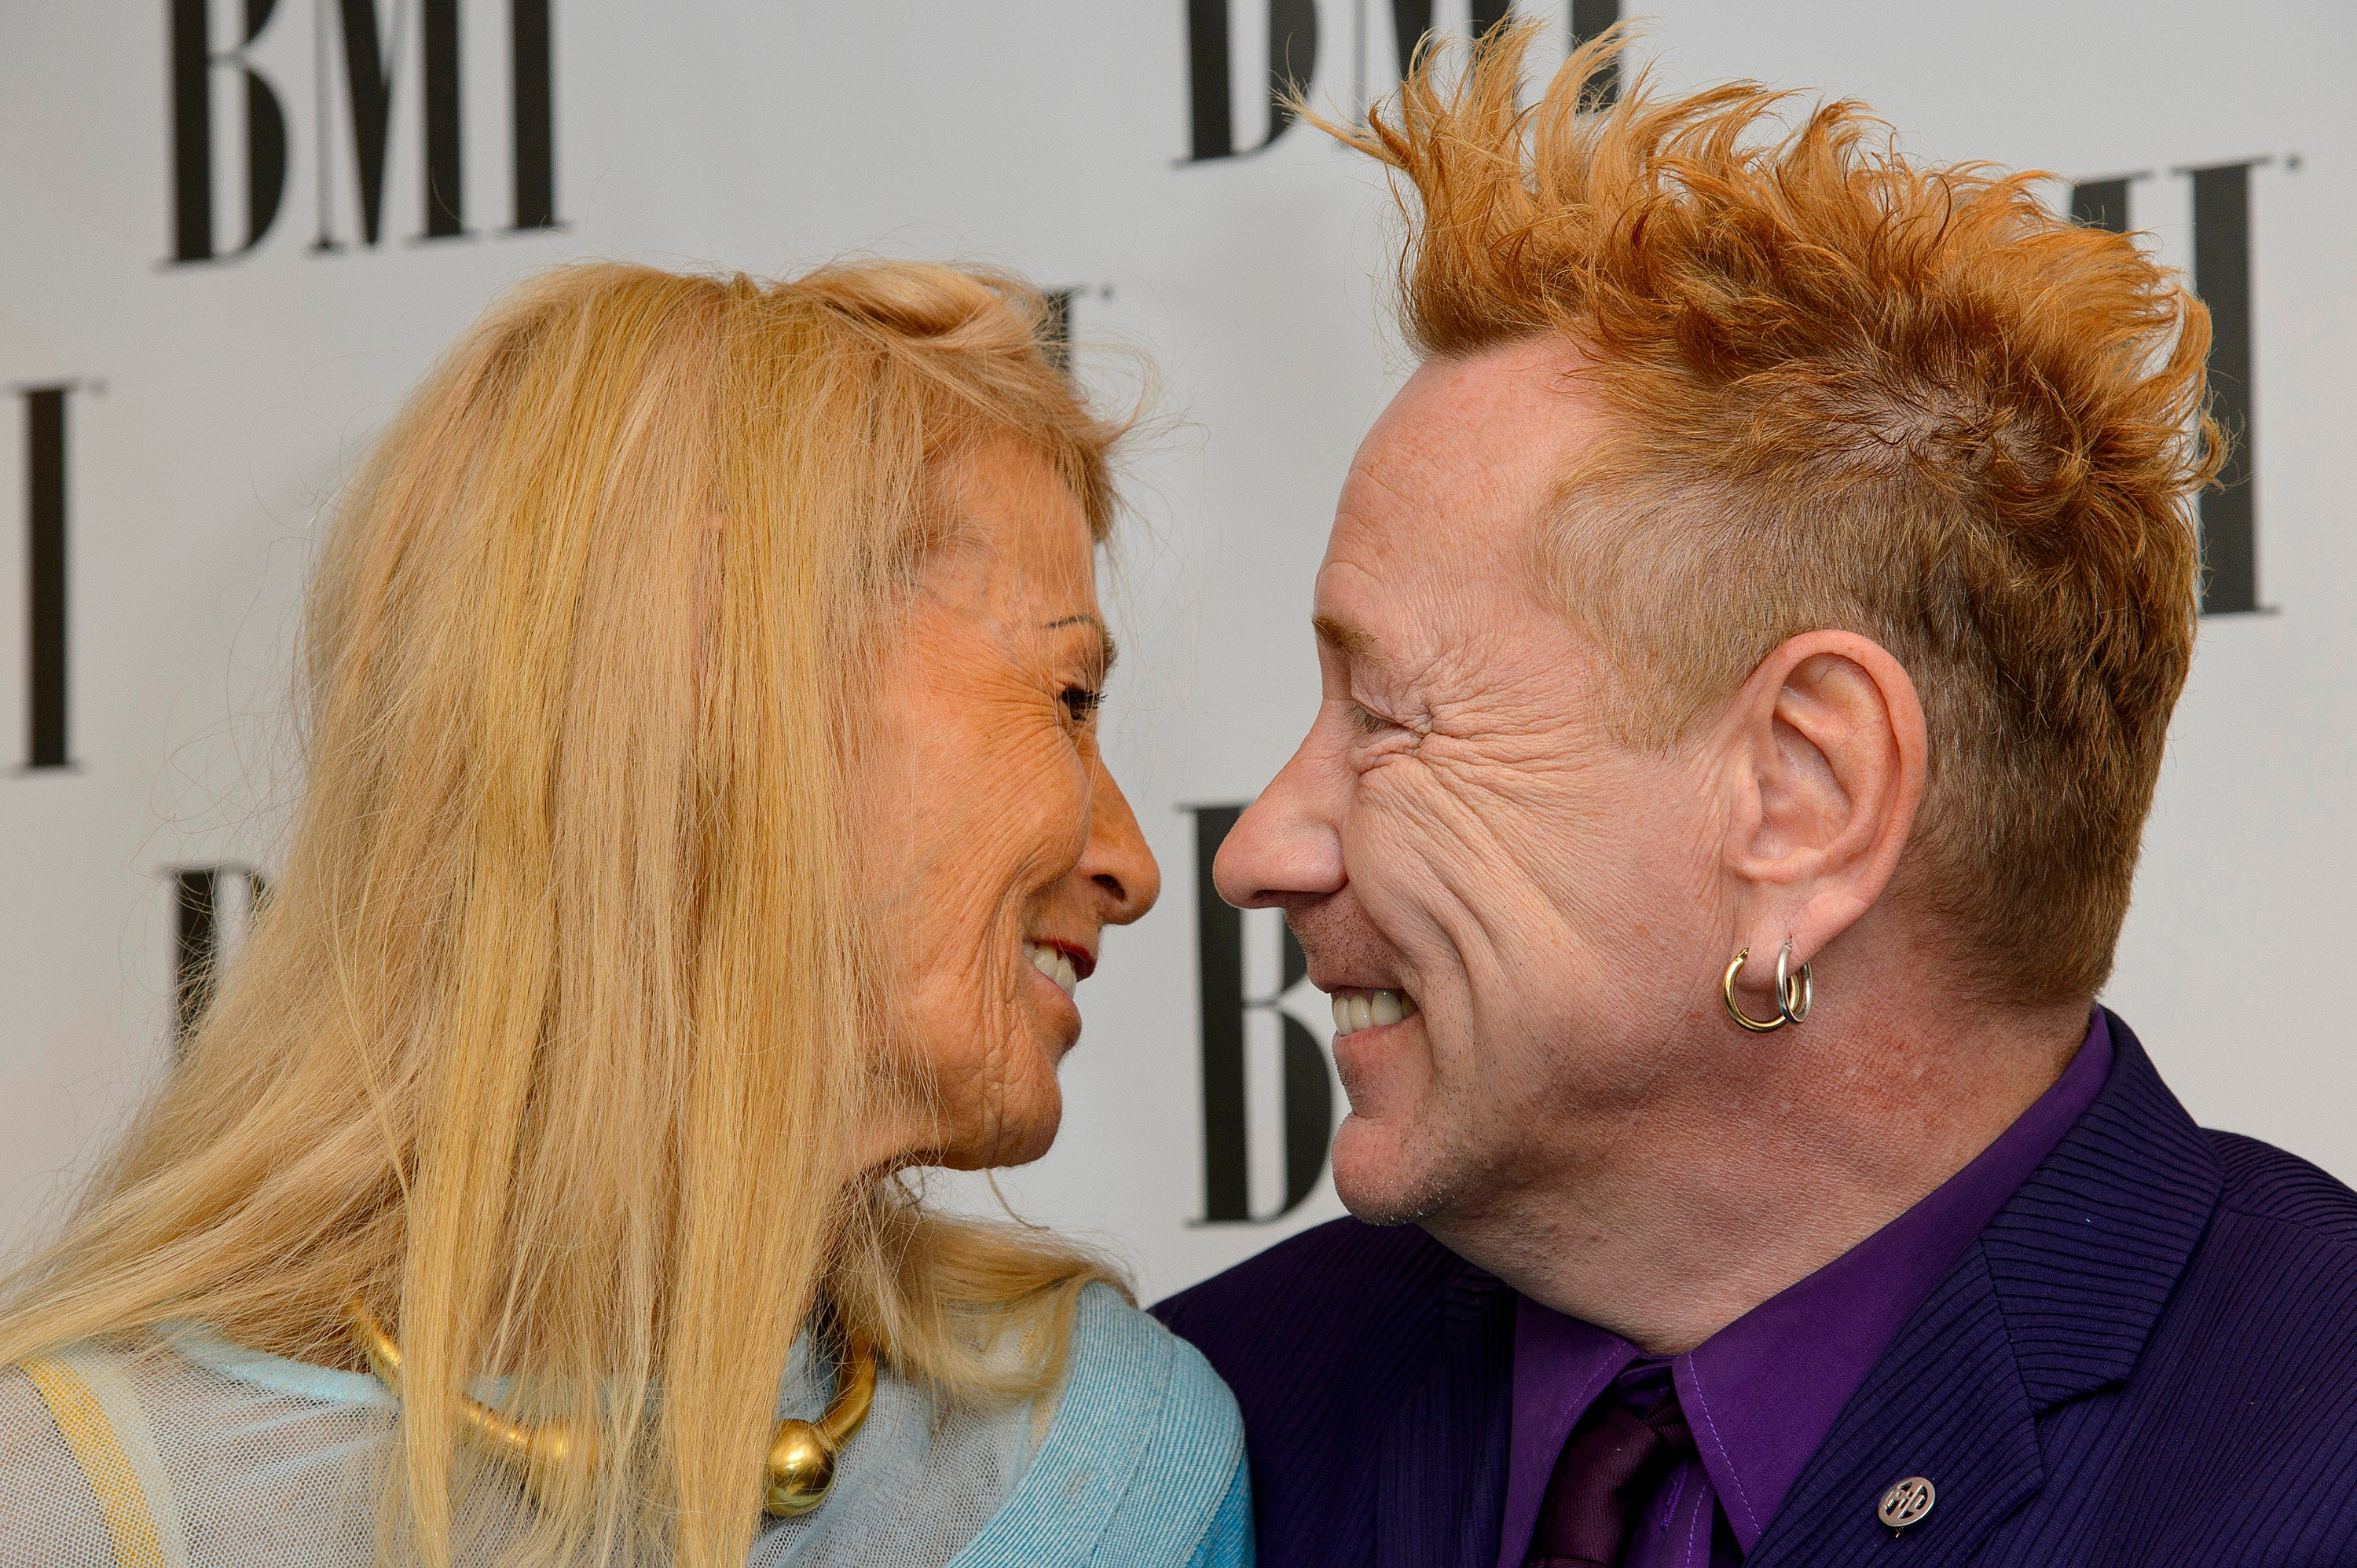 Nora Forster and John Lydon attends the BMI Awards at The Dorchester on October 15, 2013